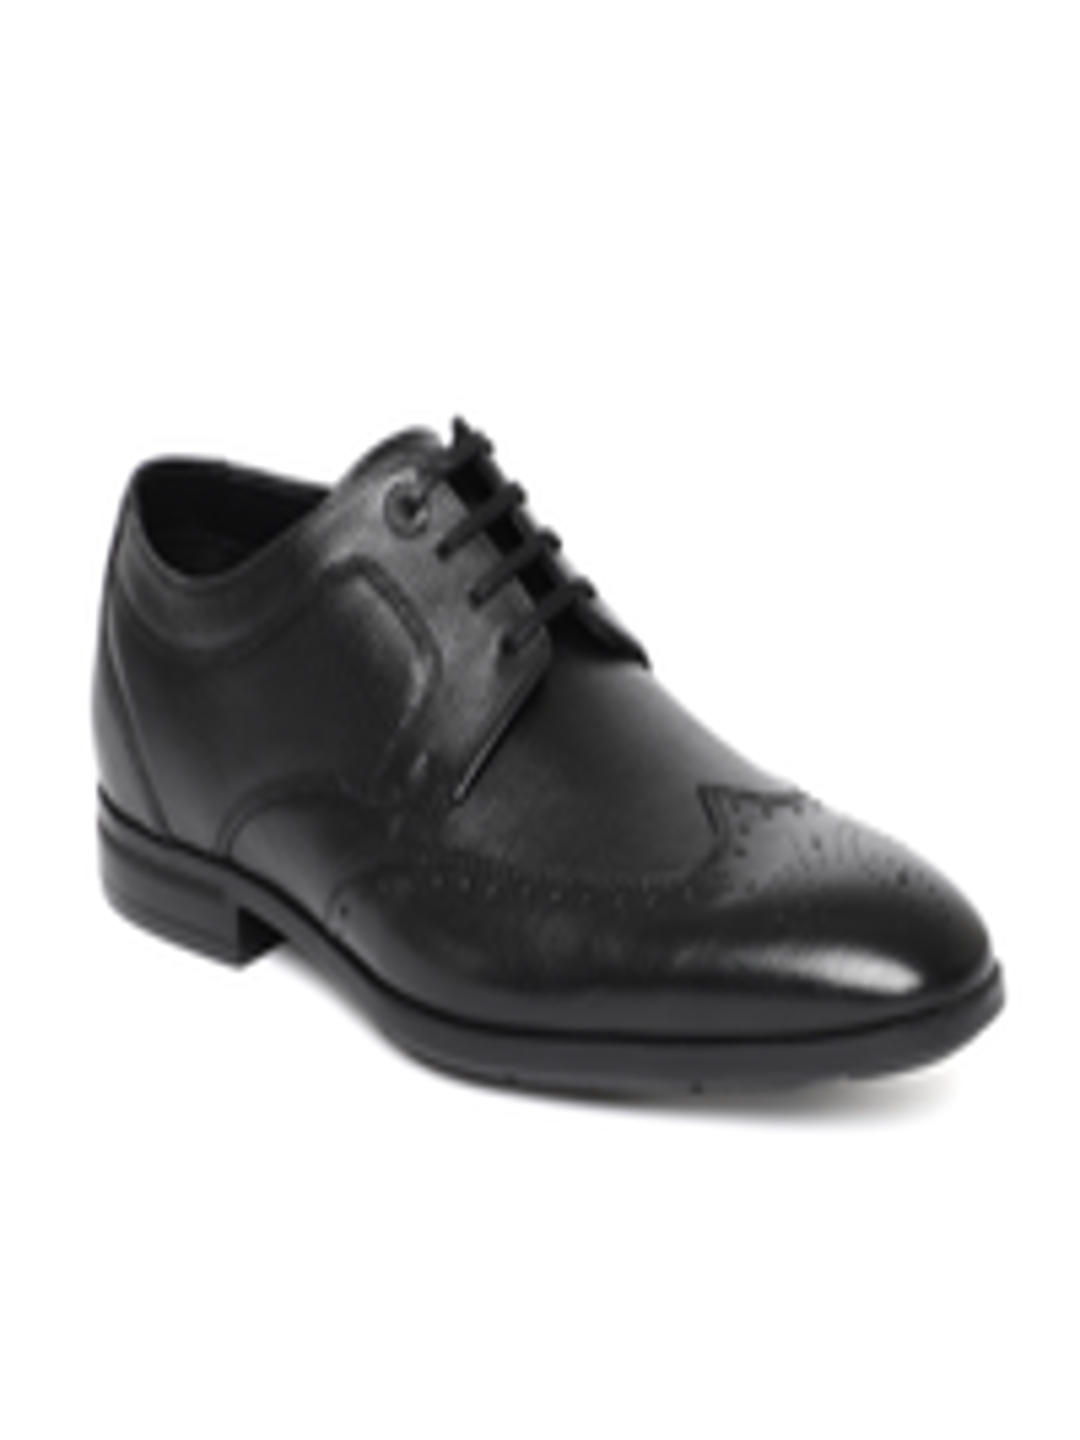 Buy Ruosh Men Black CAMEROON Textured Leather Formal Brogues - Formal ...